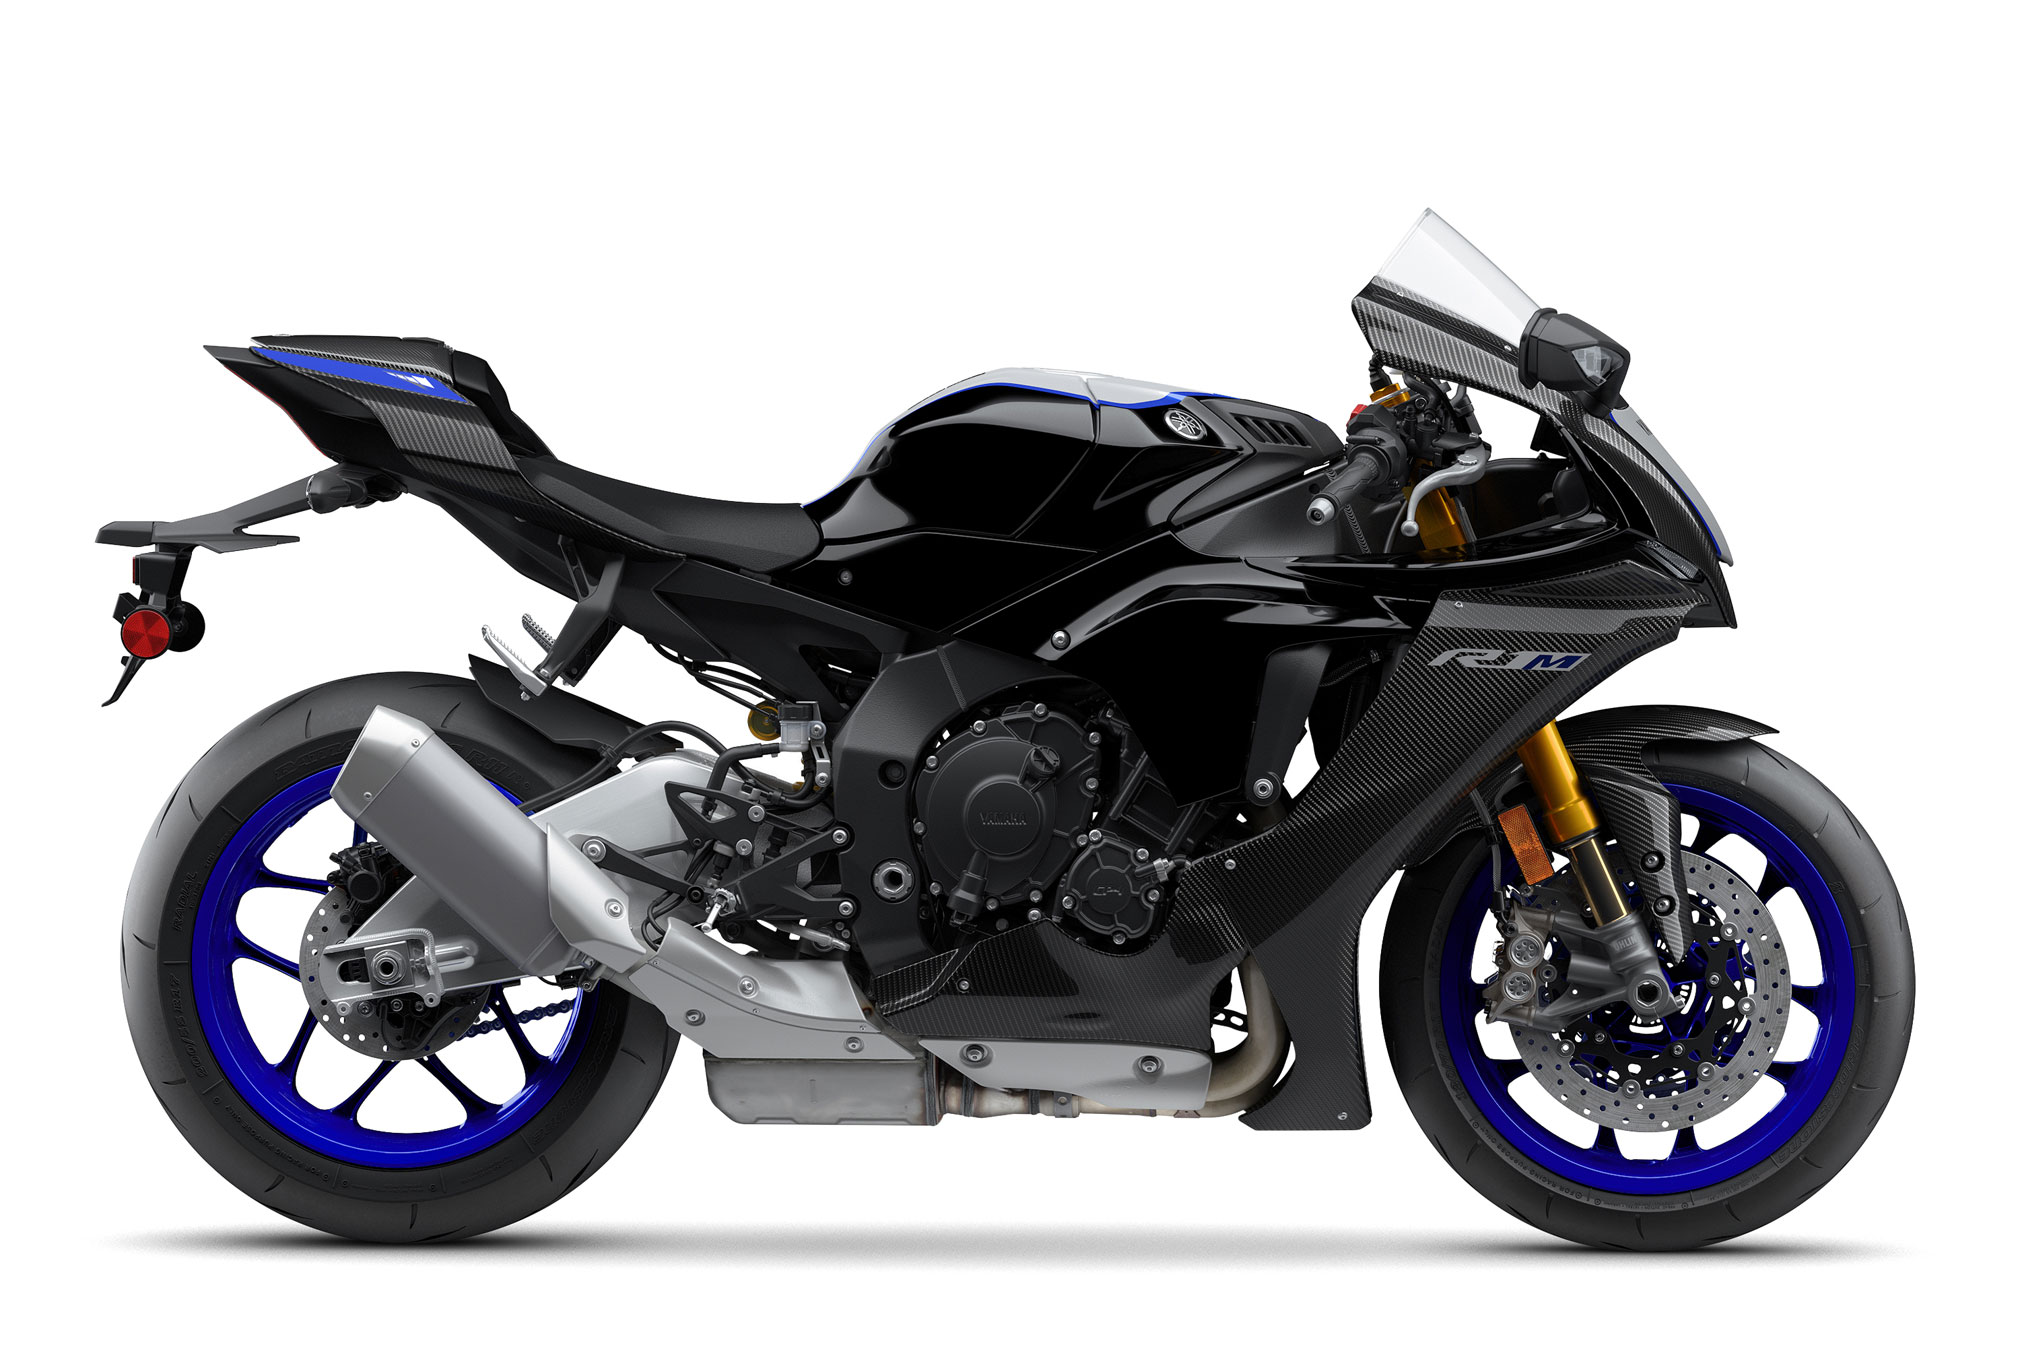 2020 Yamaha YZF-R1M Guide • Total Motorcycle